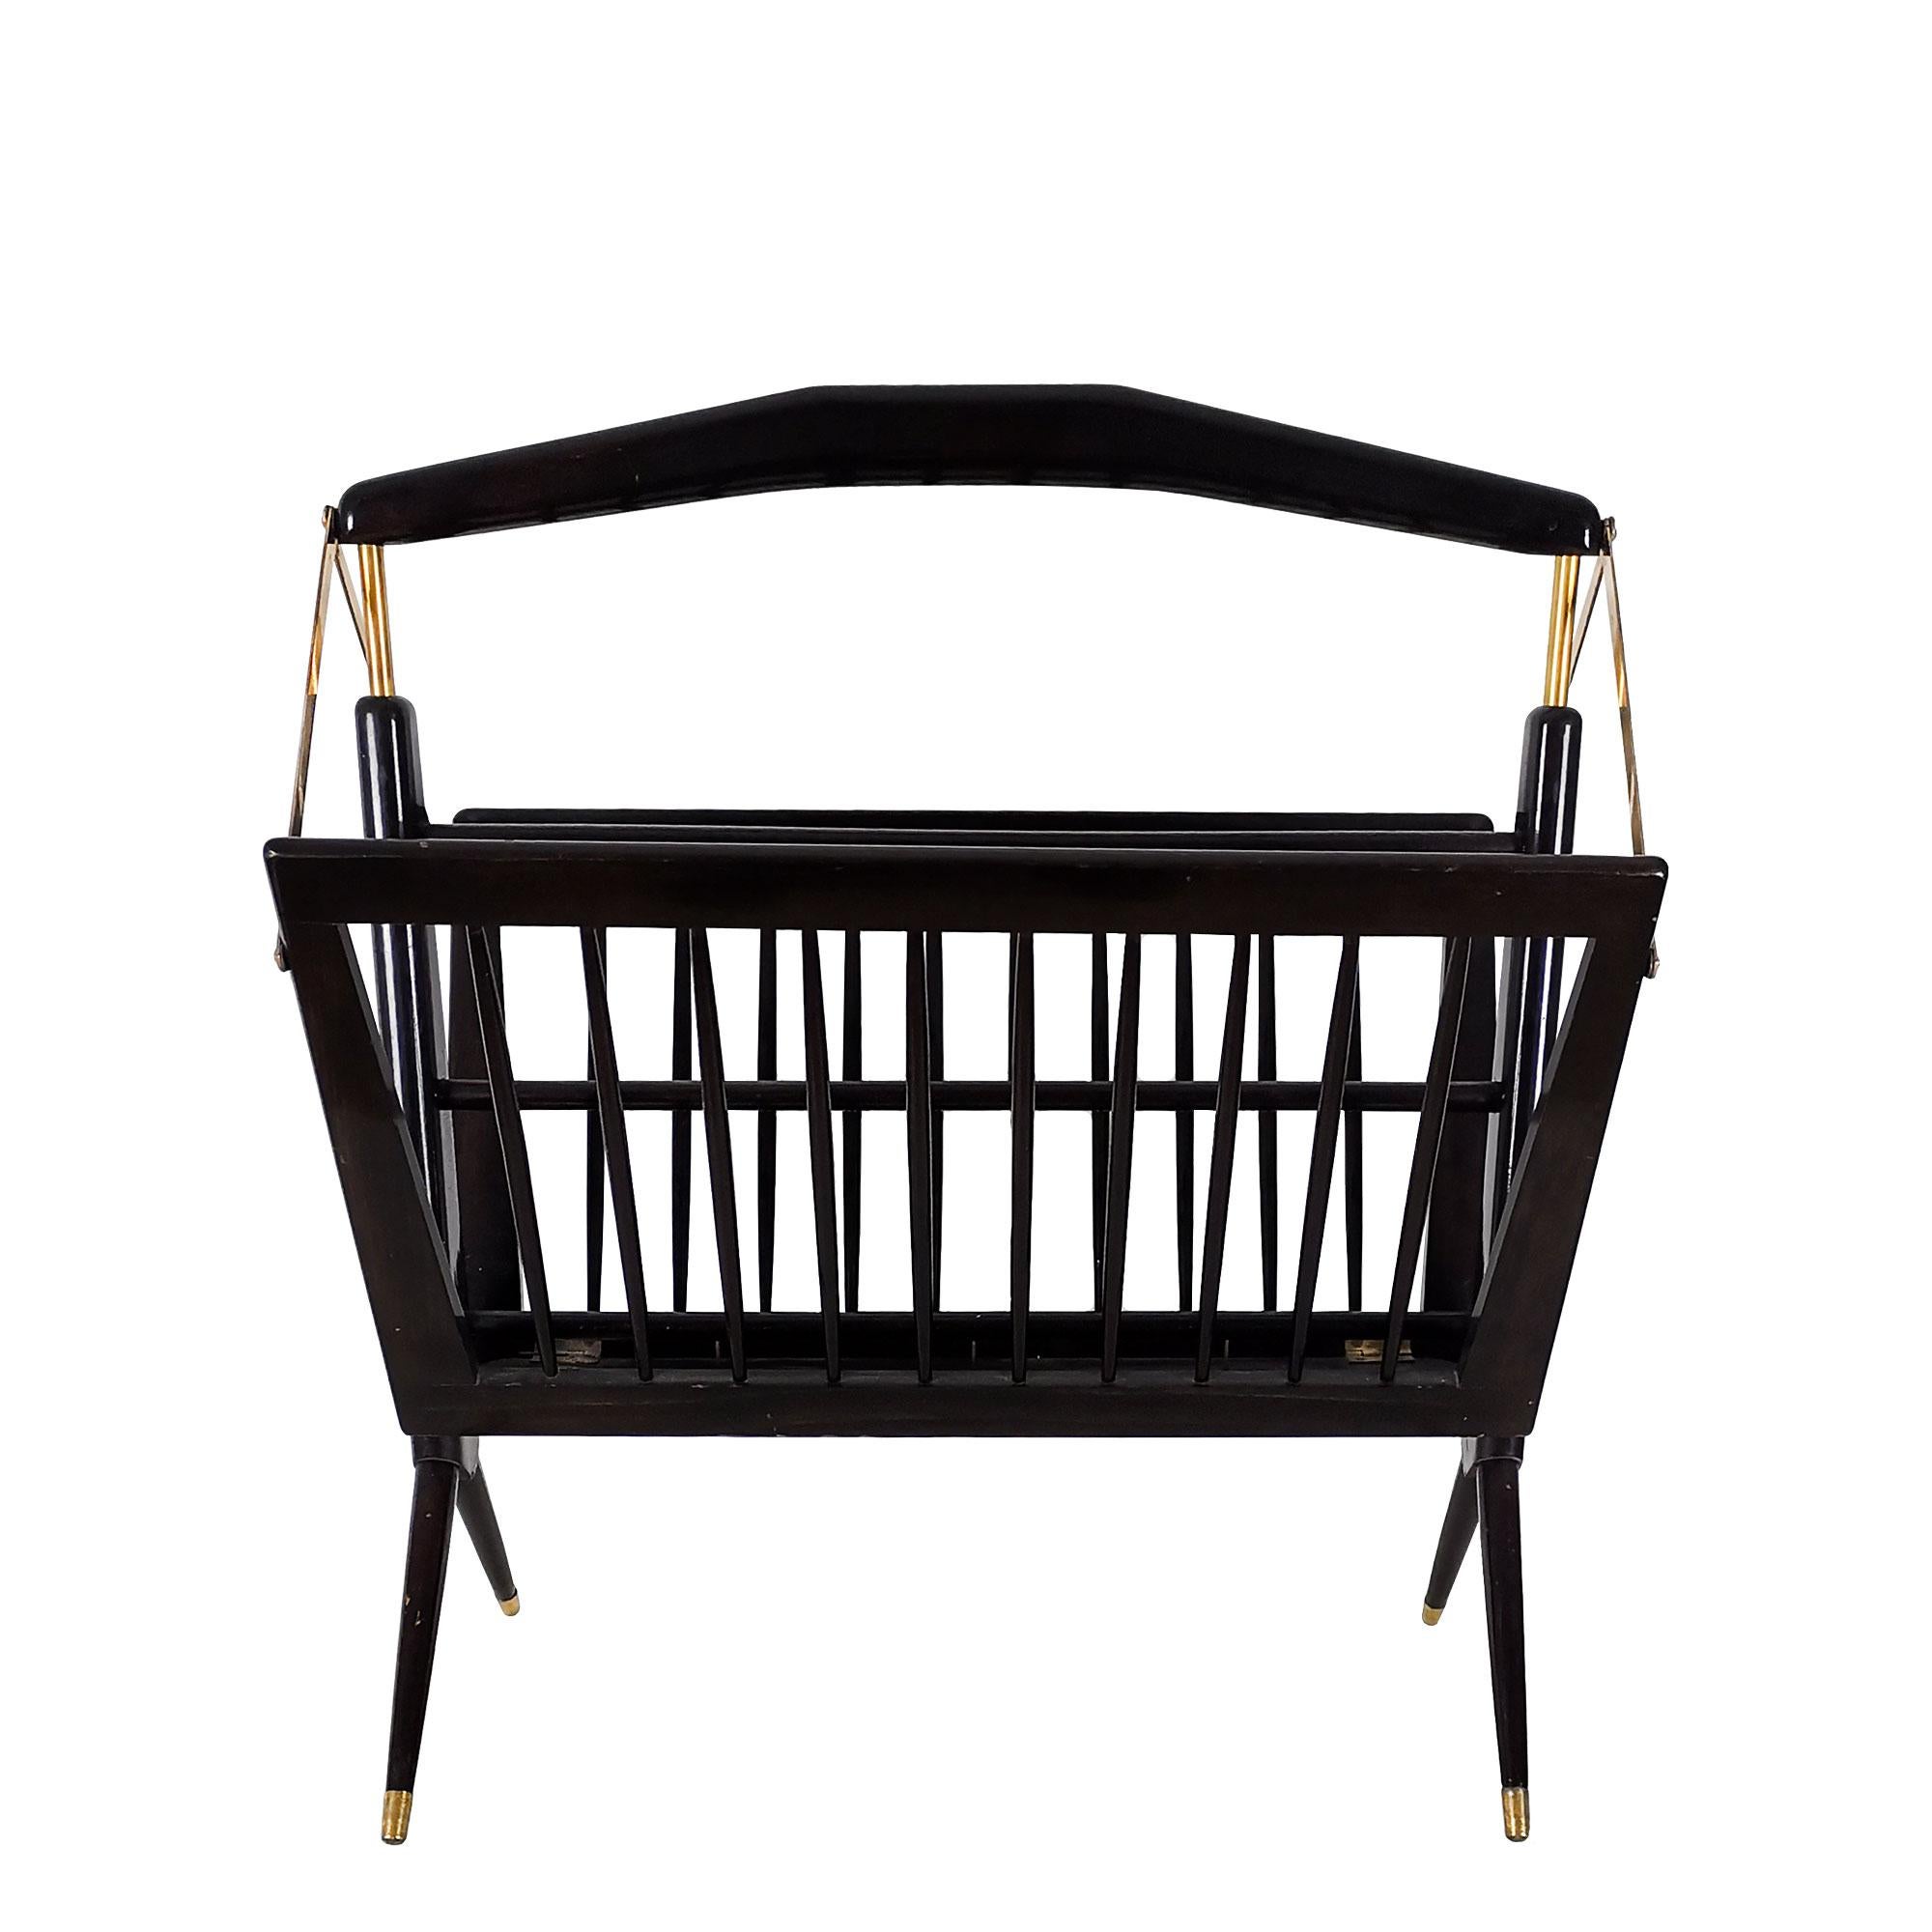 Folding magazine rack, dark stained and varnished wood.
Design: Cesare Lacca

Italy c. 1950.